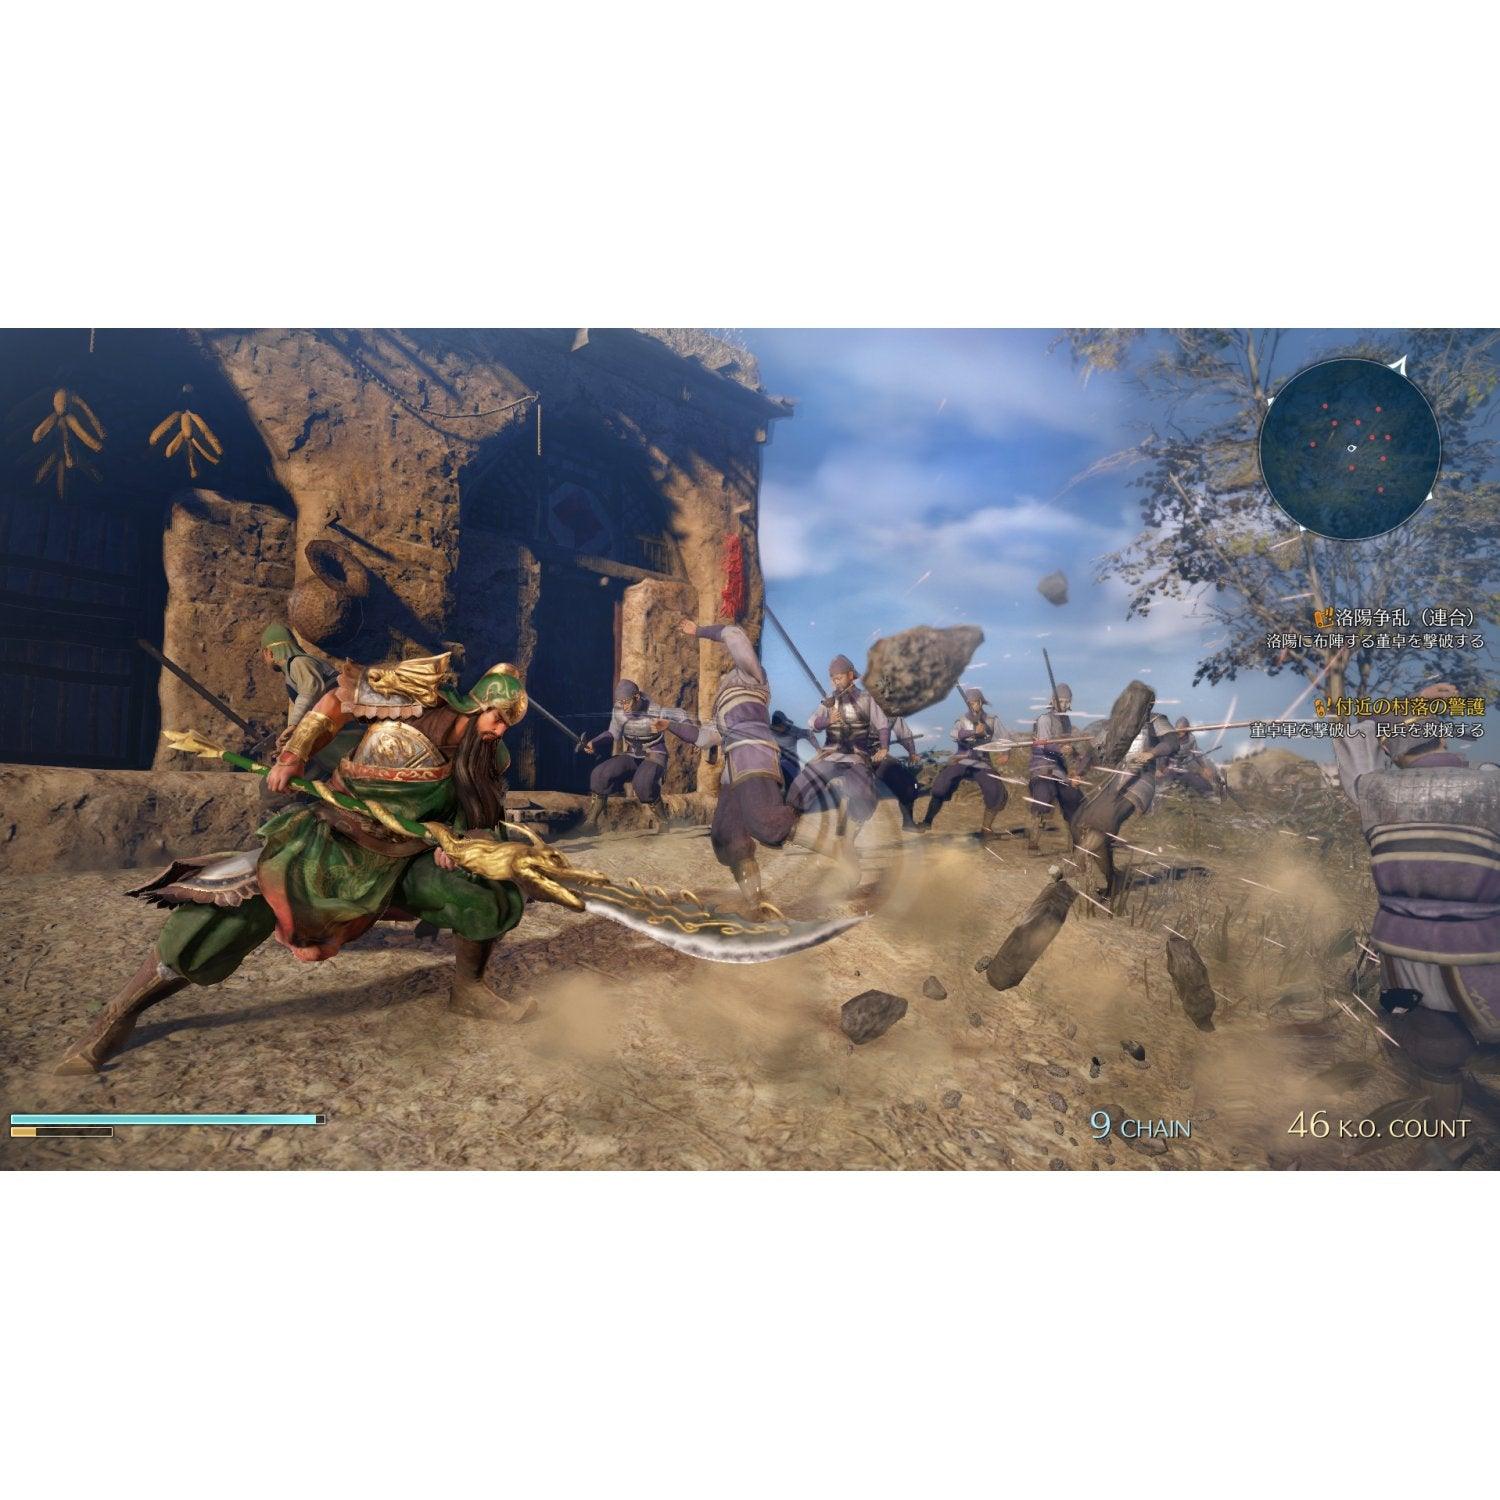 how tobise xbox one controller on dynasty warriors 8 pc